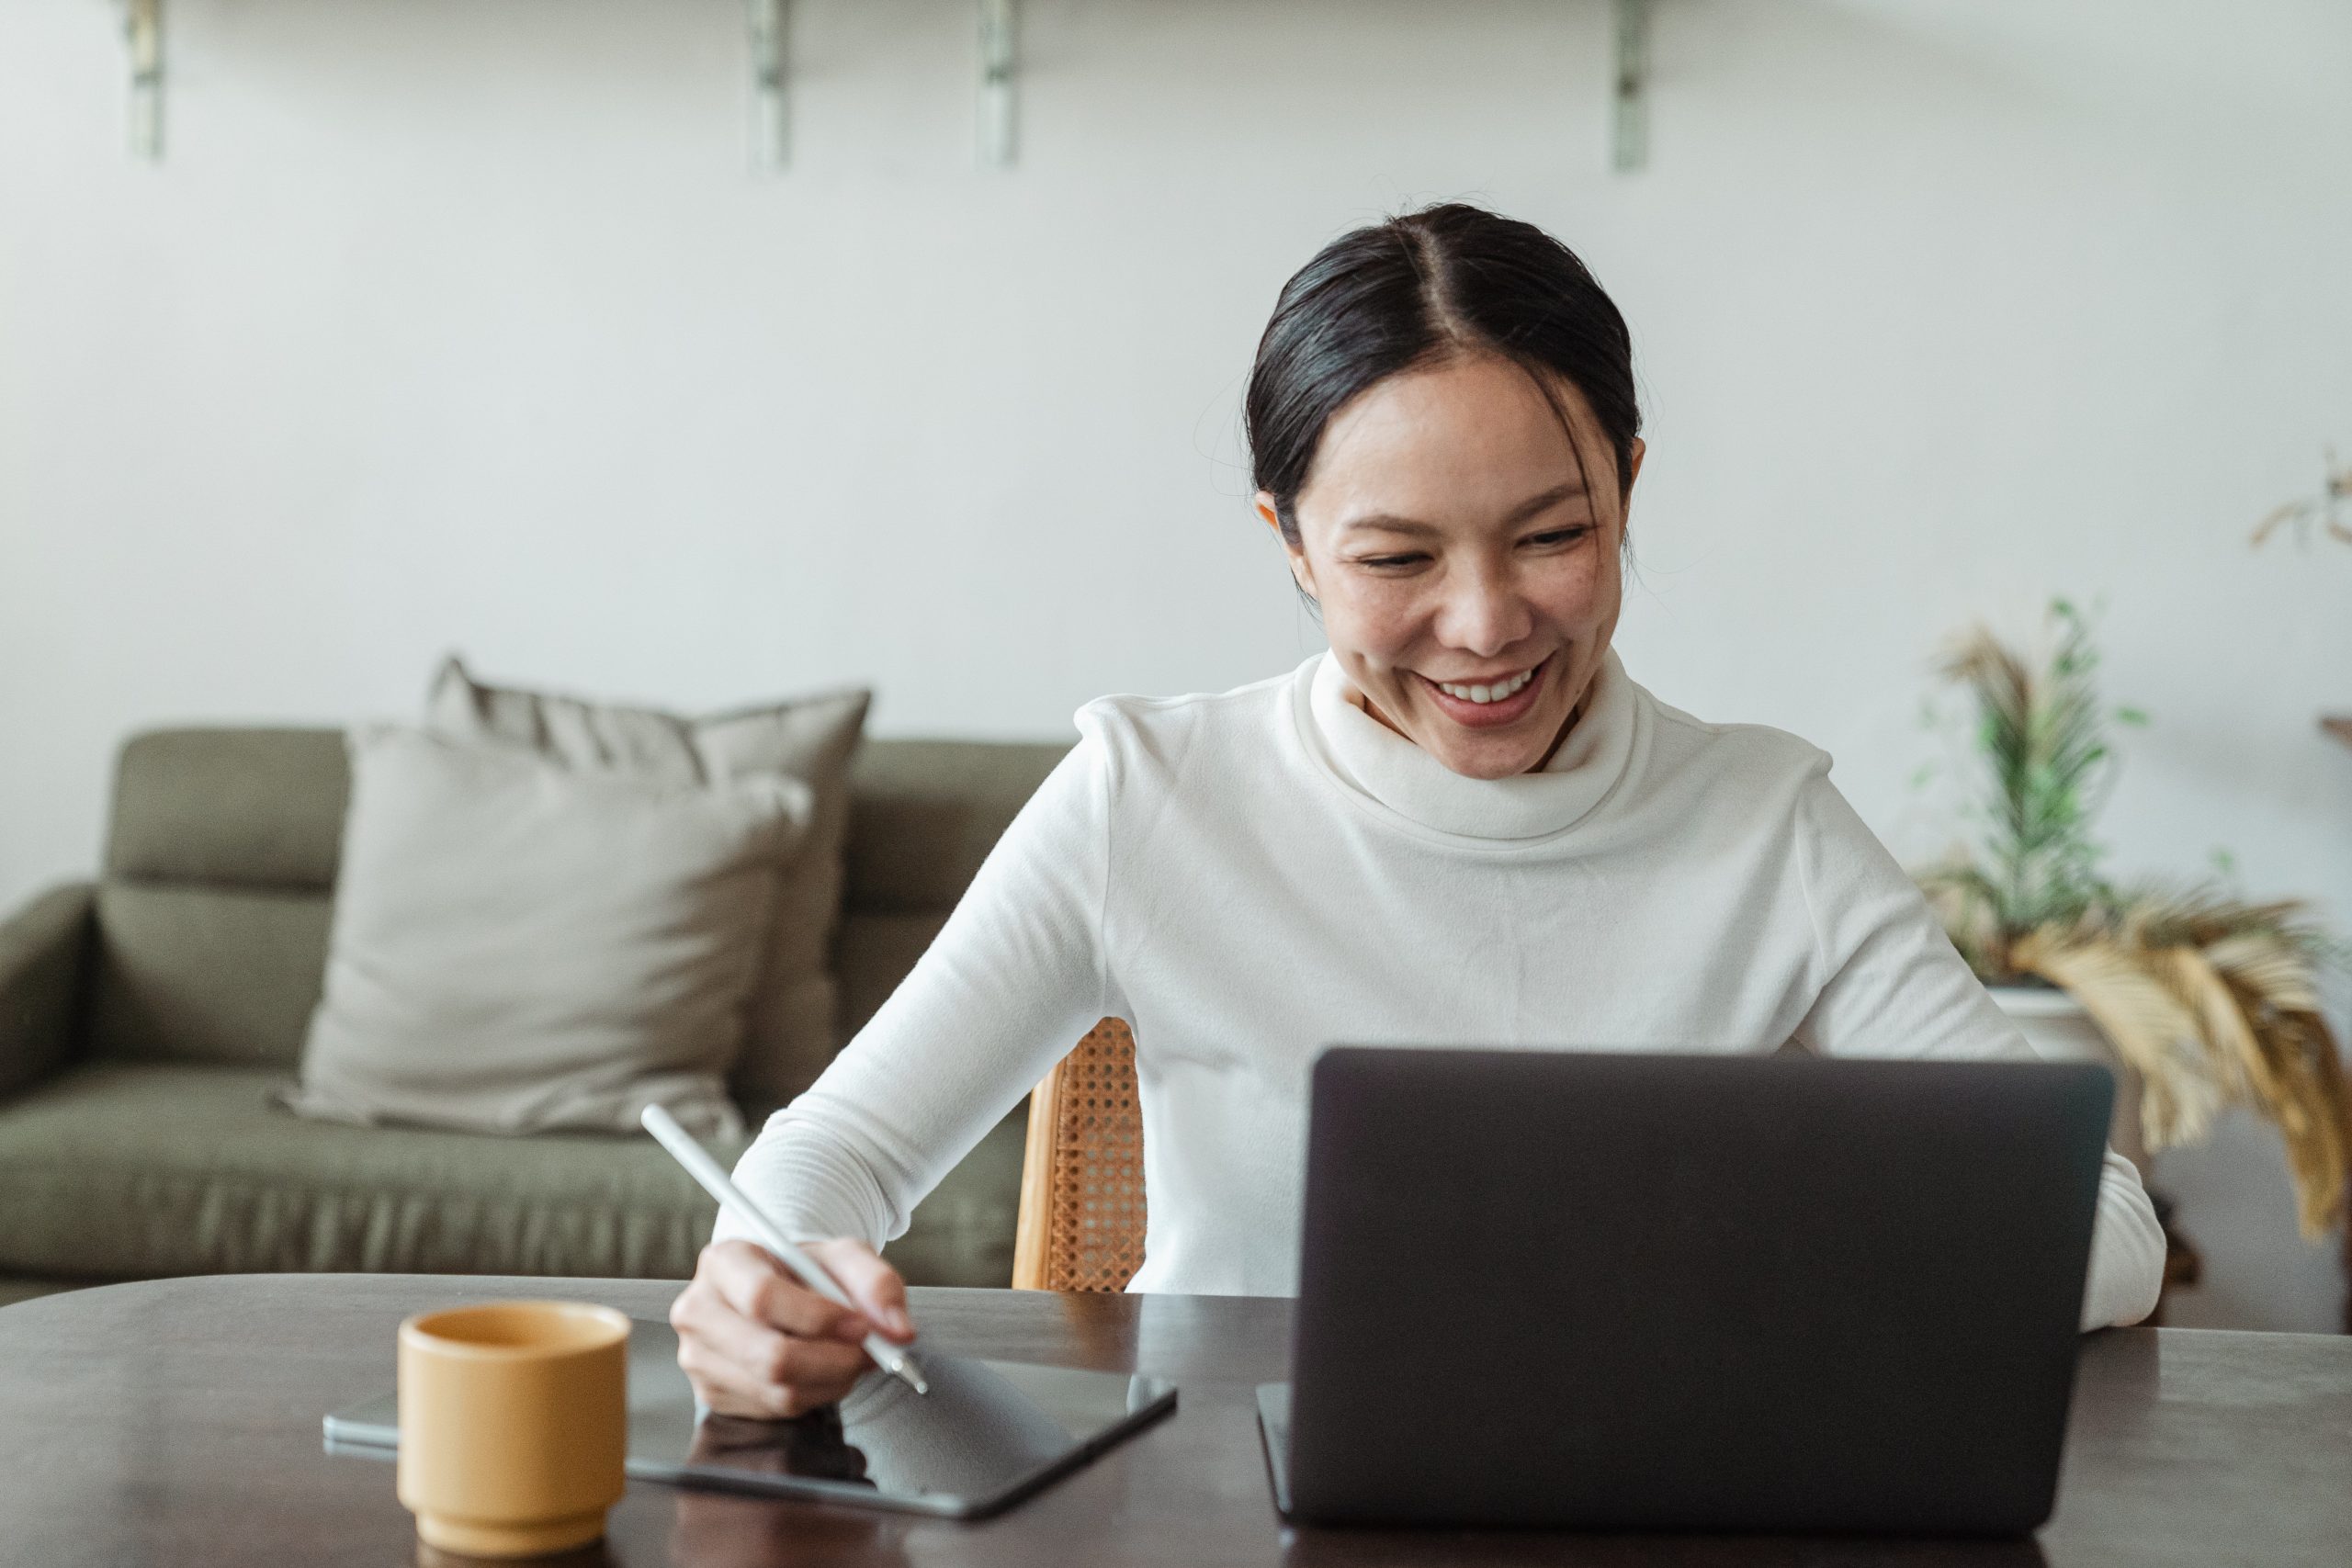 Woman working from home looking happy